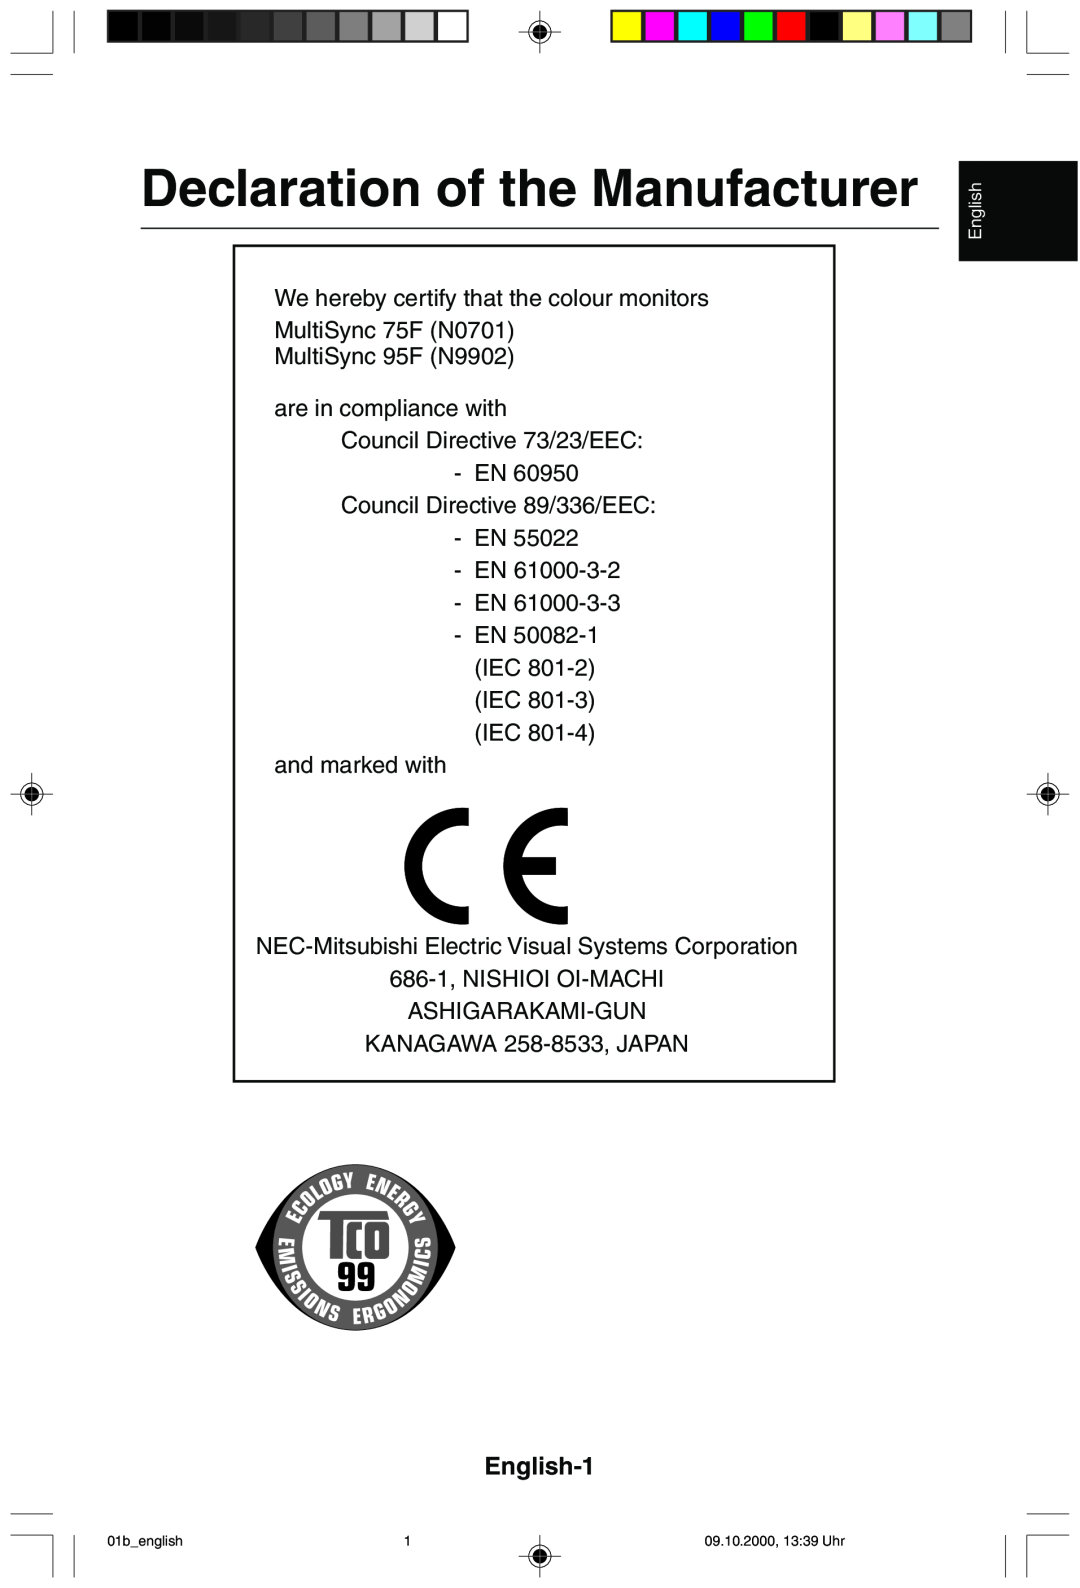 NEC 95F user manual Declaration of the Manufacturer, English-1 